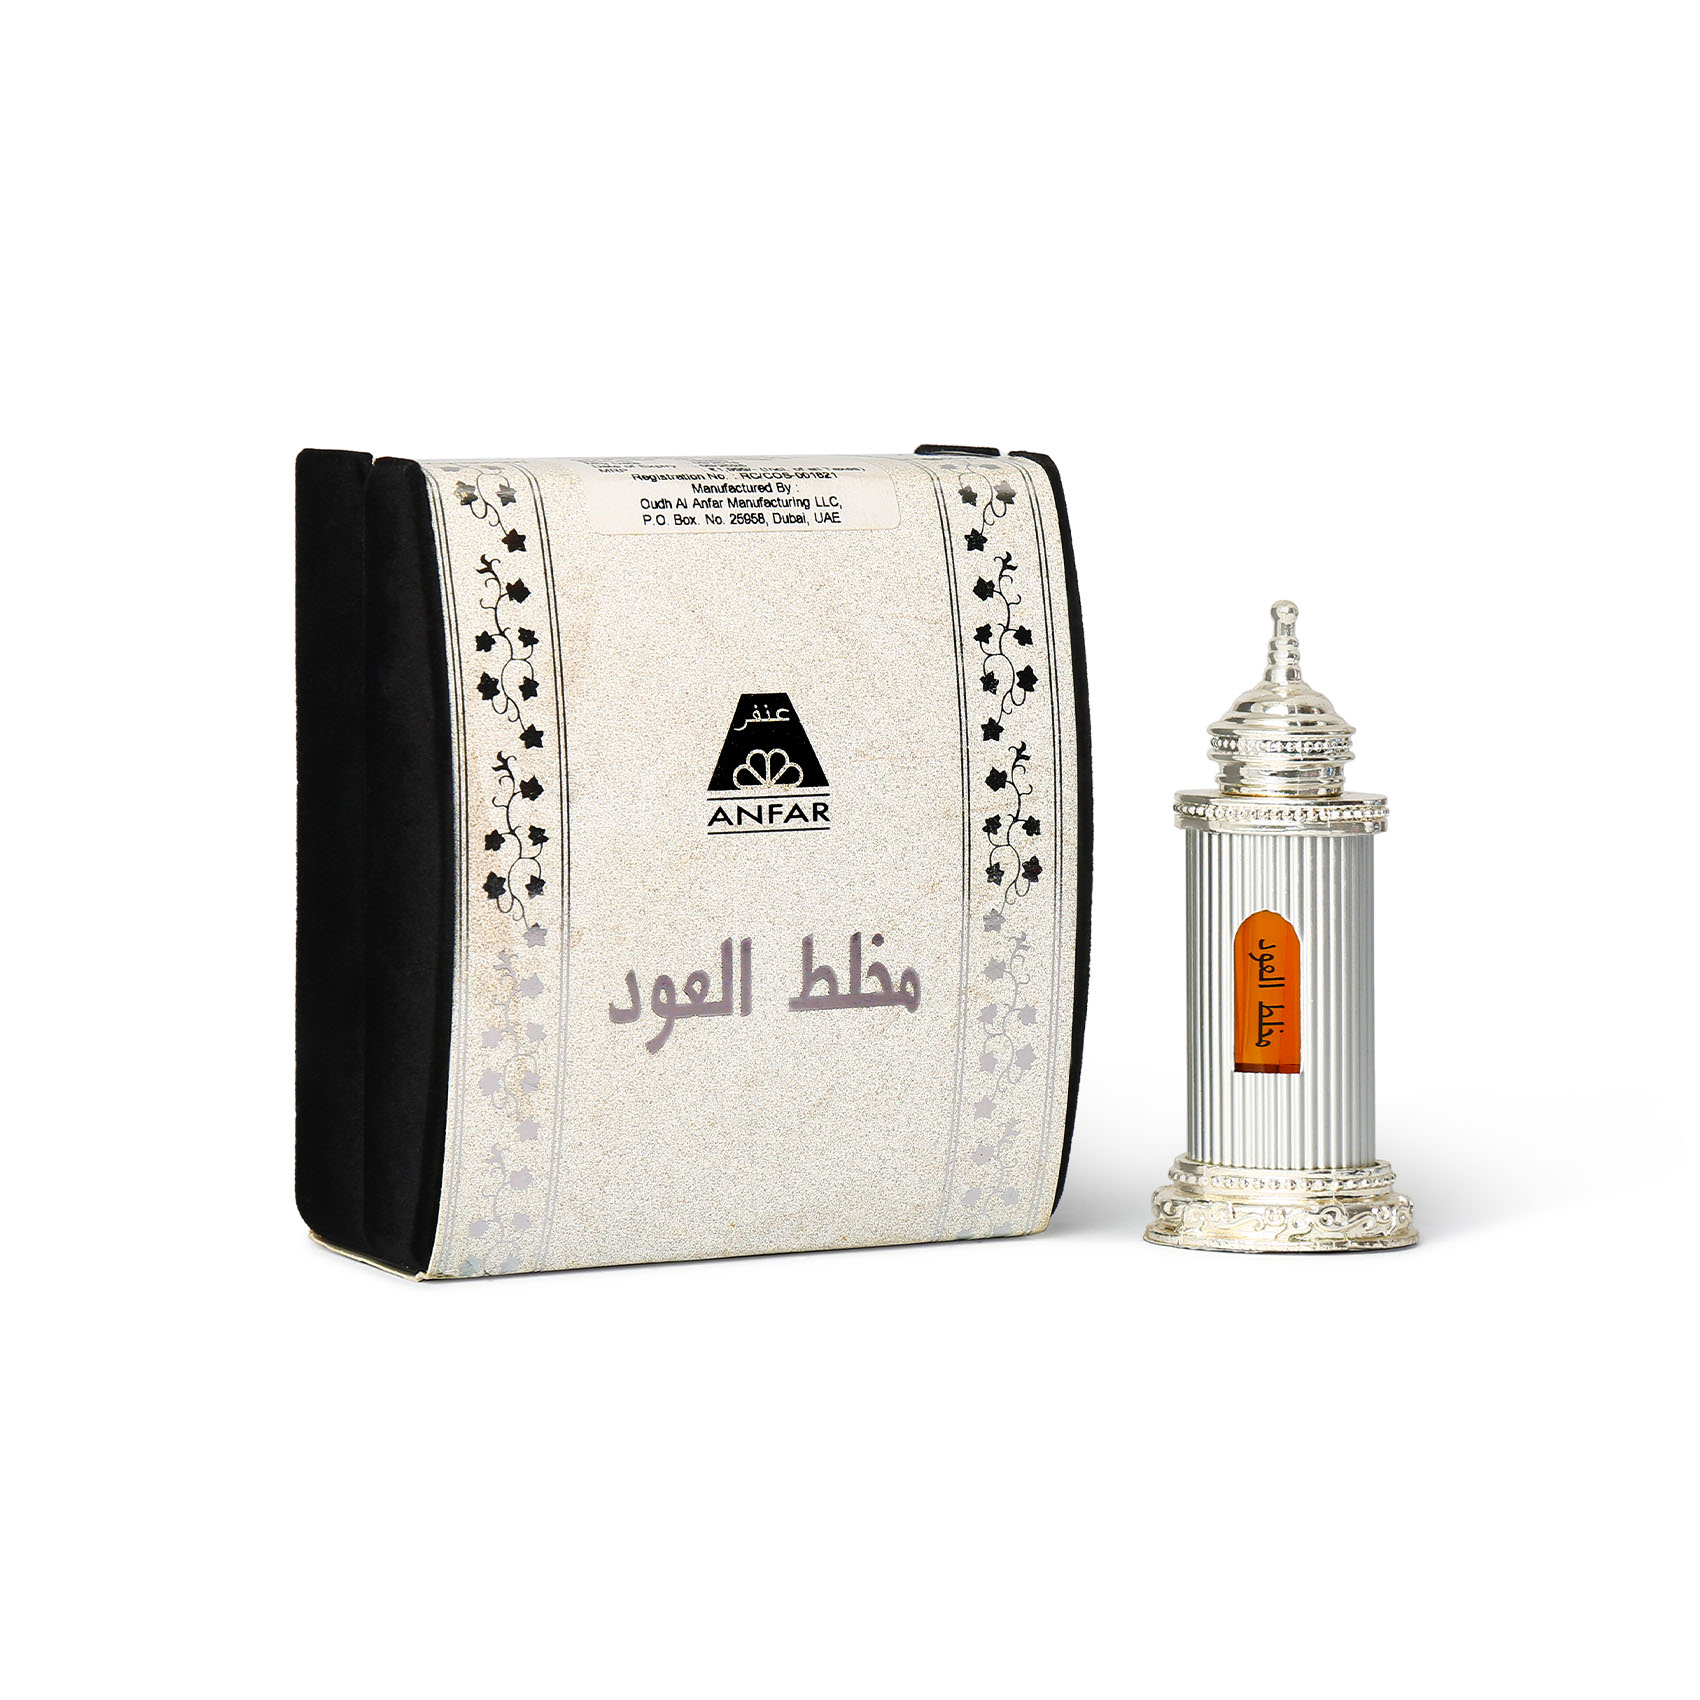 Mukhallat Al Oudh Silver Concentrated Perfume Free From Alcohol 12ml For Men & Women  By Anfar- Made In Dubai